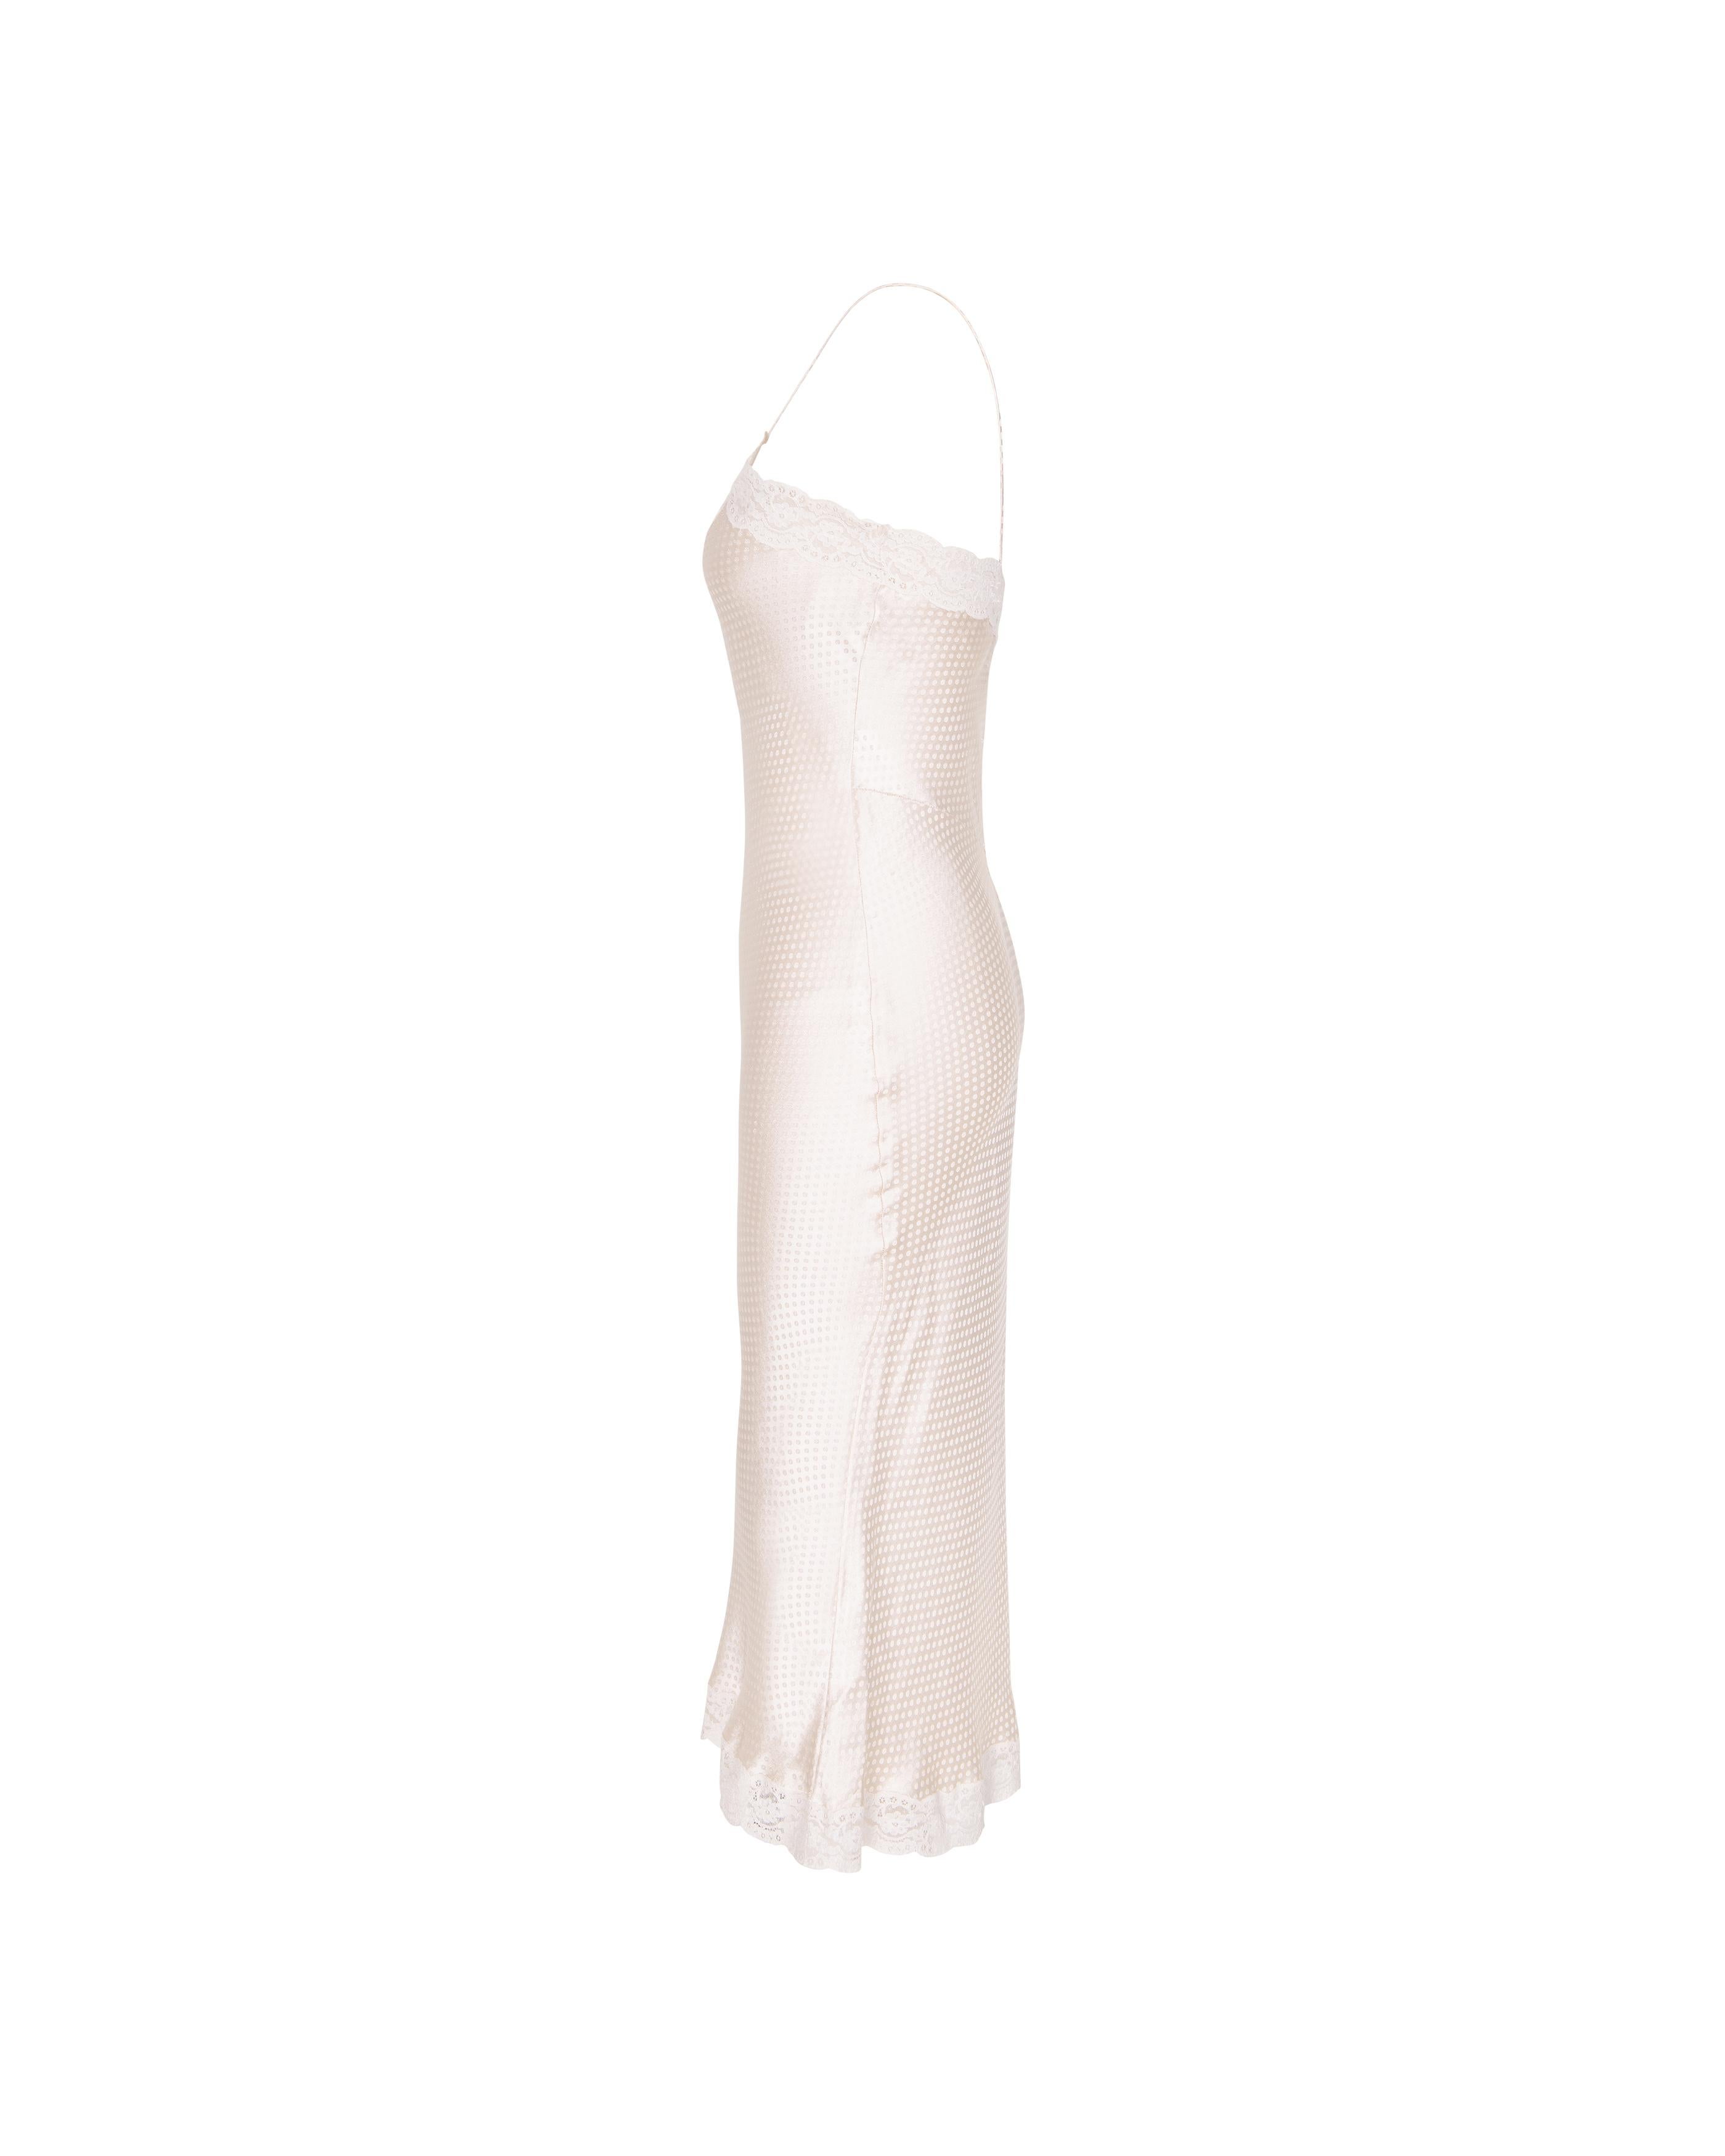 S/S 2005 Christian Dior by John Galliano polka dot bias cut cream slip dress with lace details. Sleeveless ecru midi slip dress with woven dot details throughout, and lace trim at bust and hem. Additional fabric allotment at straps allows for straps